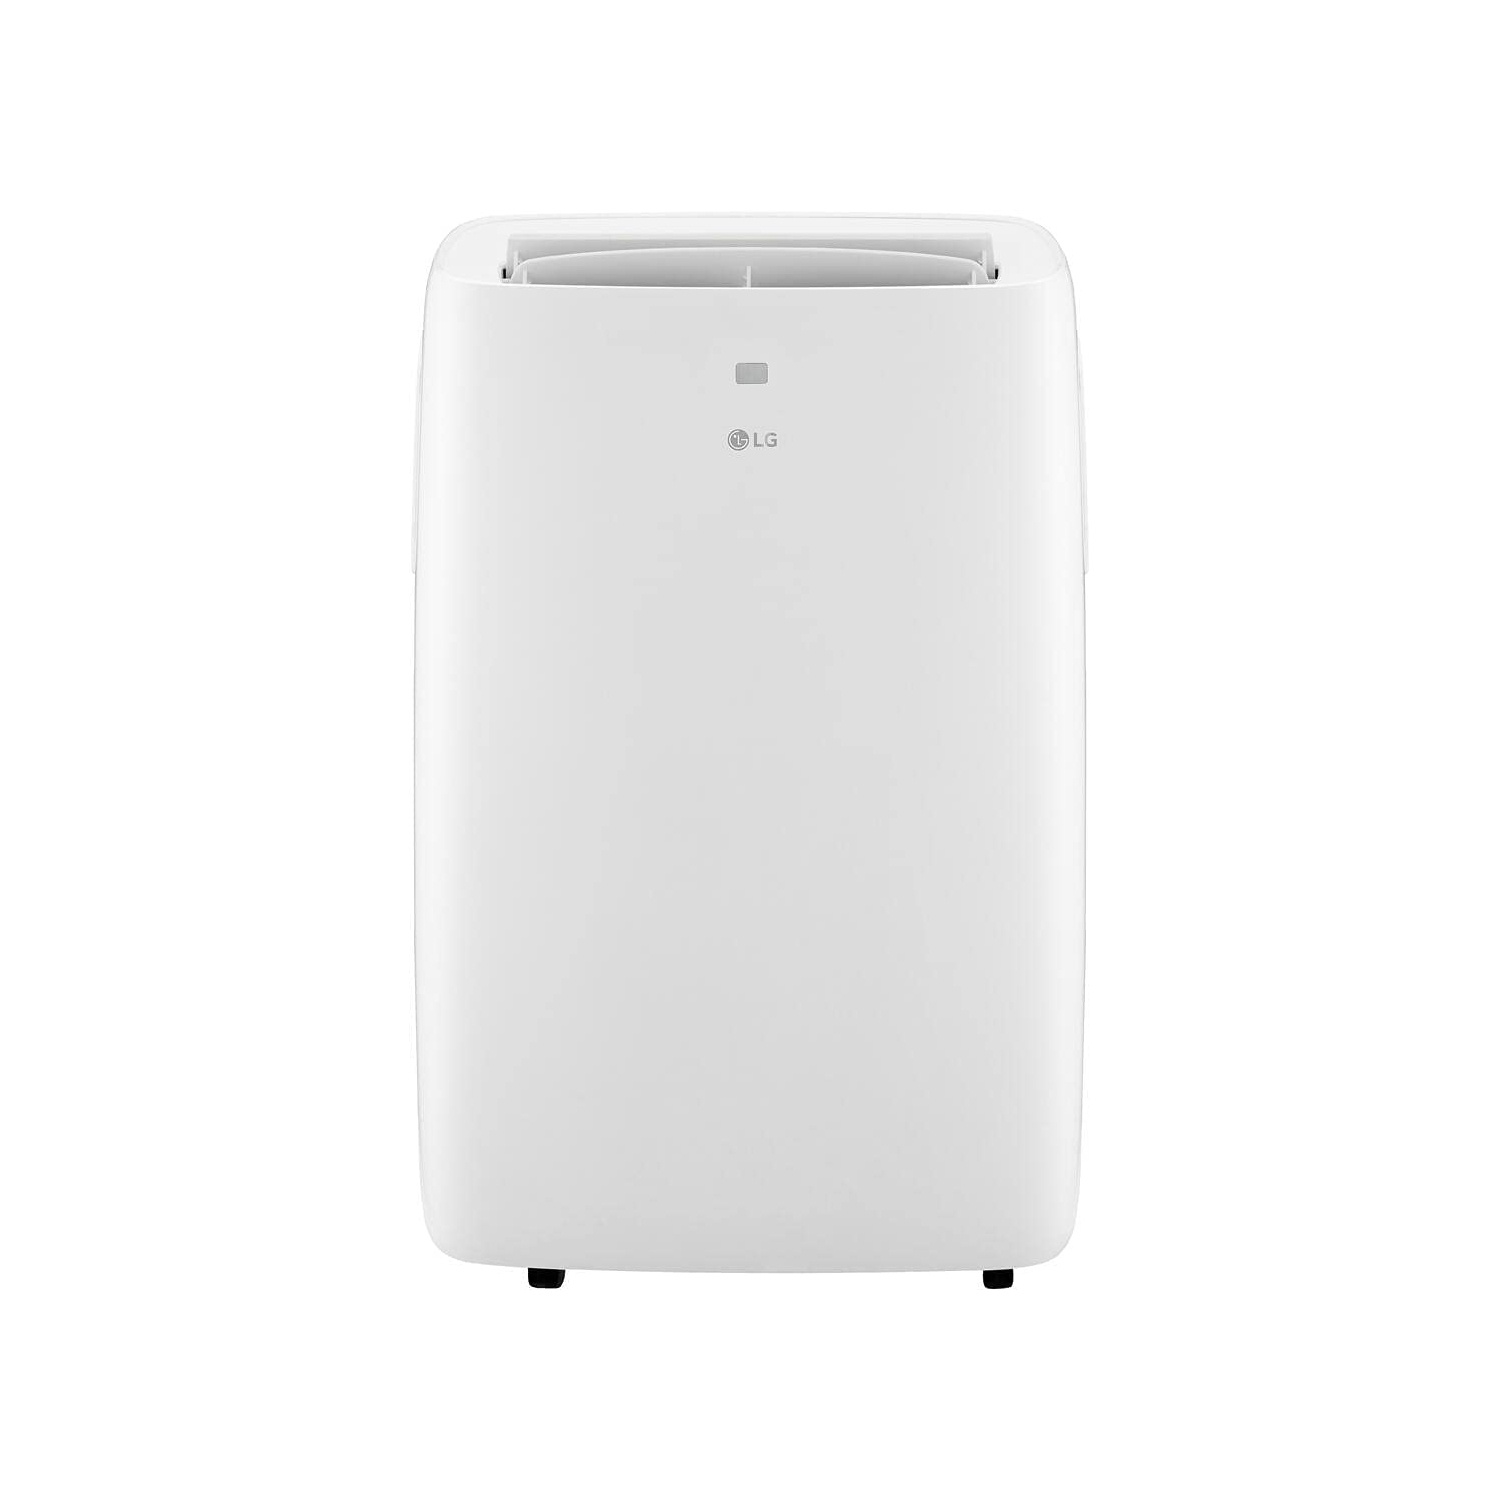 LG Electronics 10,000 BTU (7,000 DOE) Portable Air Conditioner with Remote - NEW